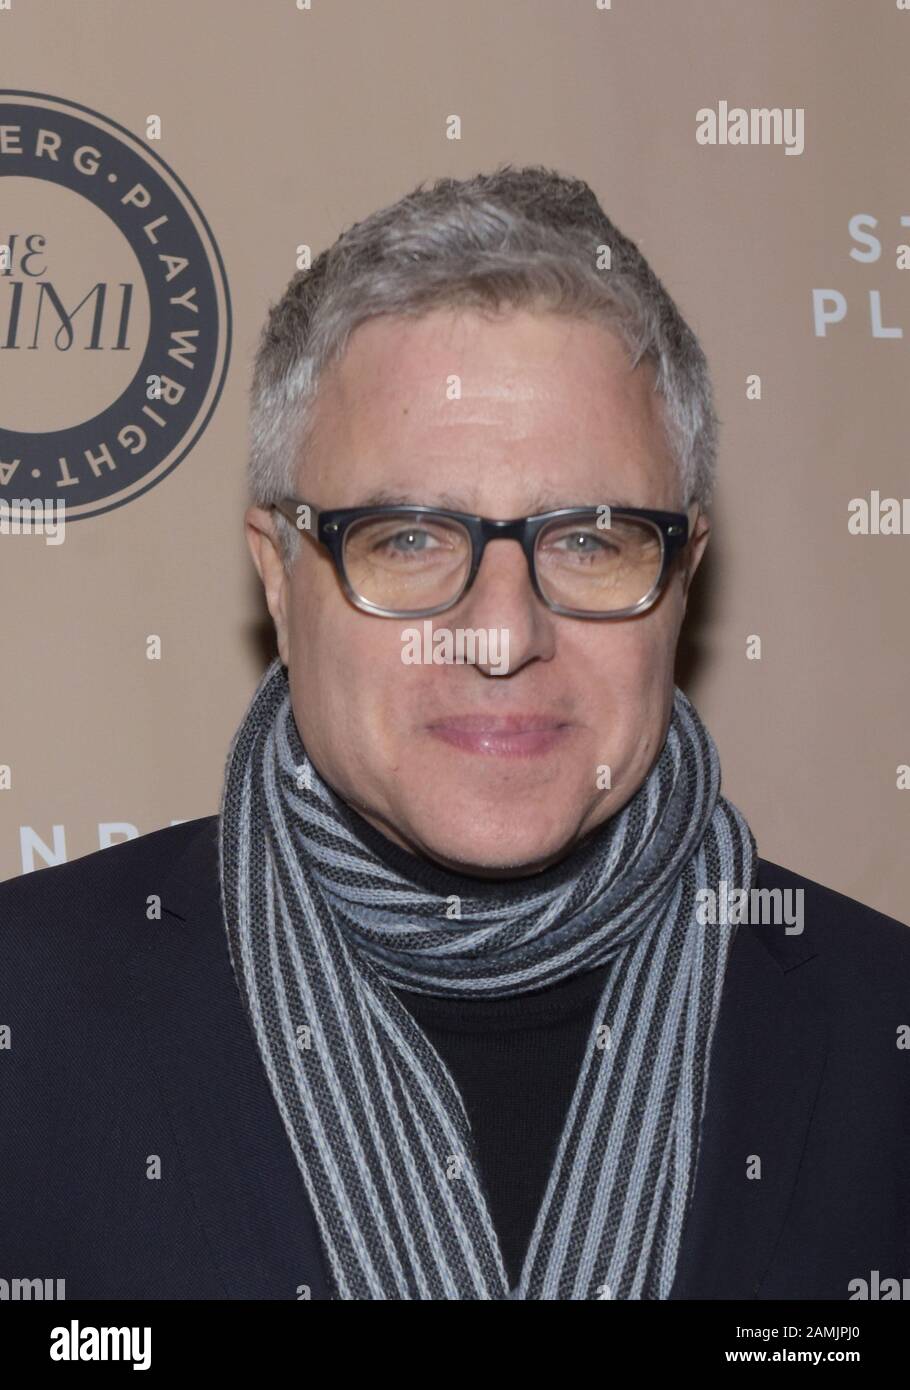 New York, USA. 13th Jan, 2020. NEW YORK, NEW YORK - JANUARY 13: Neil Pepe attends 2019 Steinberg Playwright Awards at Lincoln Center Theater, Mitzi E. Newhouse Theater January 13, 2020 in New York City. Photo: Jeremy Smith/imageSPACE Credit: Imagespace/Alamy Live News Stock Photo